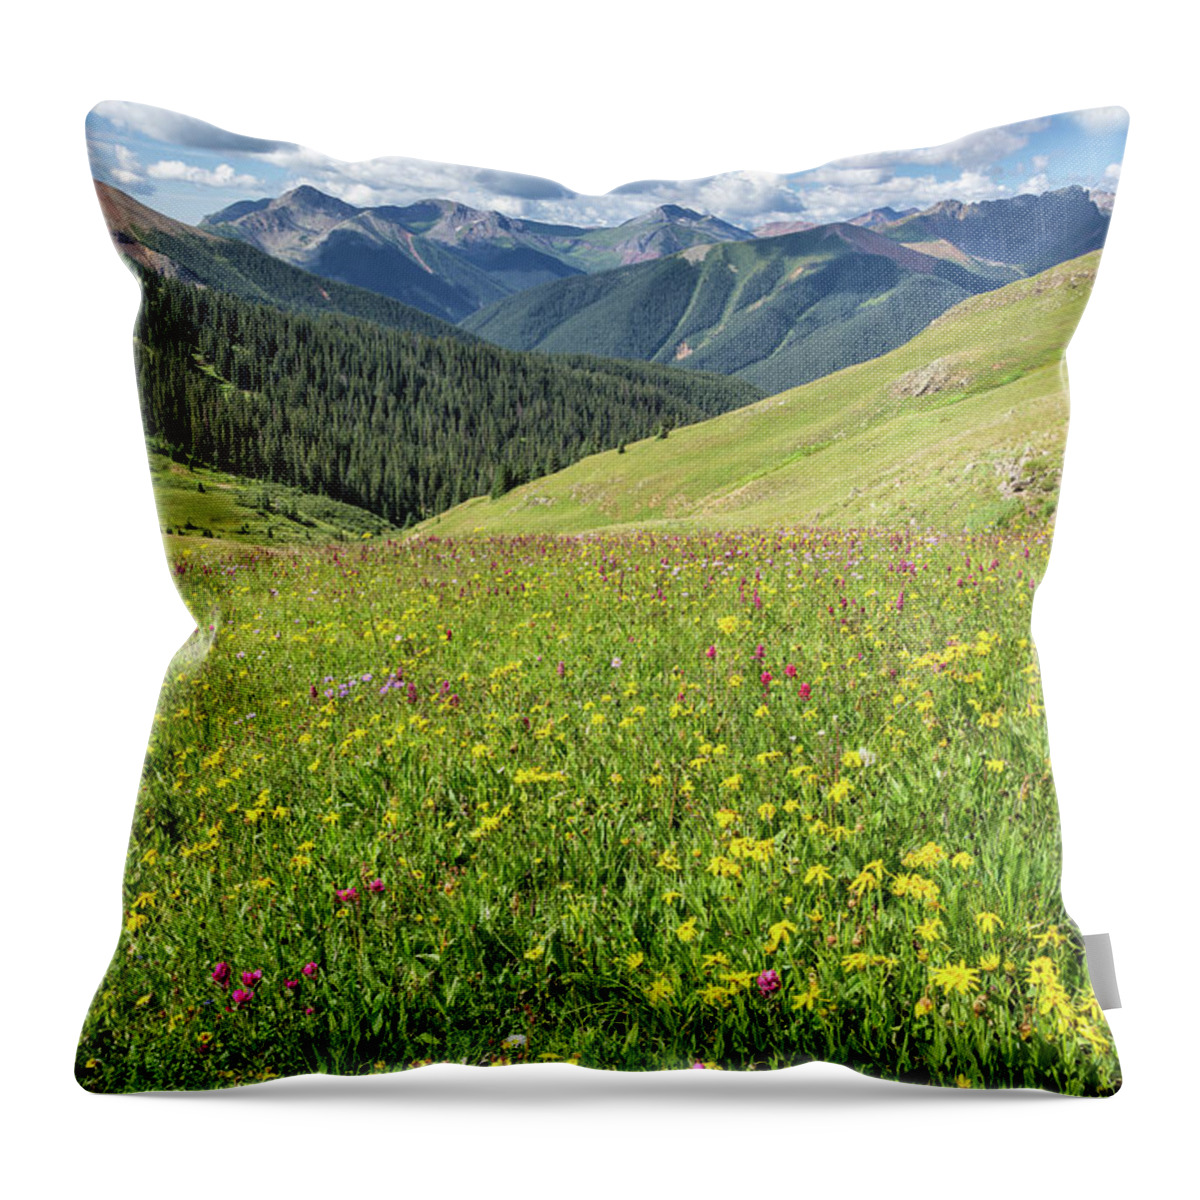 Wildflowers Throw Pillow featuring the photograph The Hills Are Alive by Denise Bush